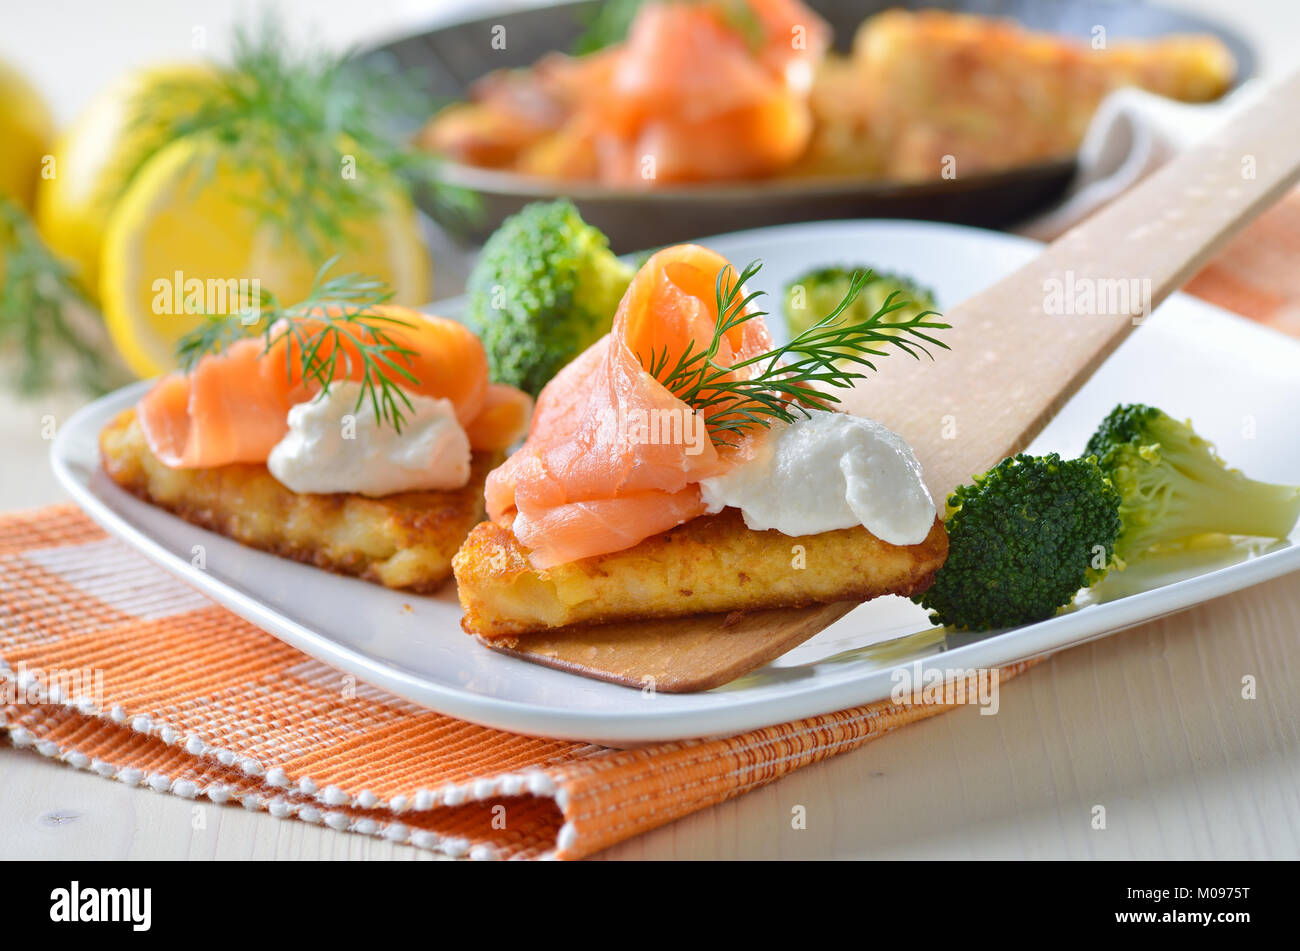 Grated fried potatoes with smoked salmon and creamed horseradish sauce Stock Photo